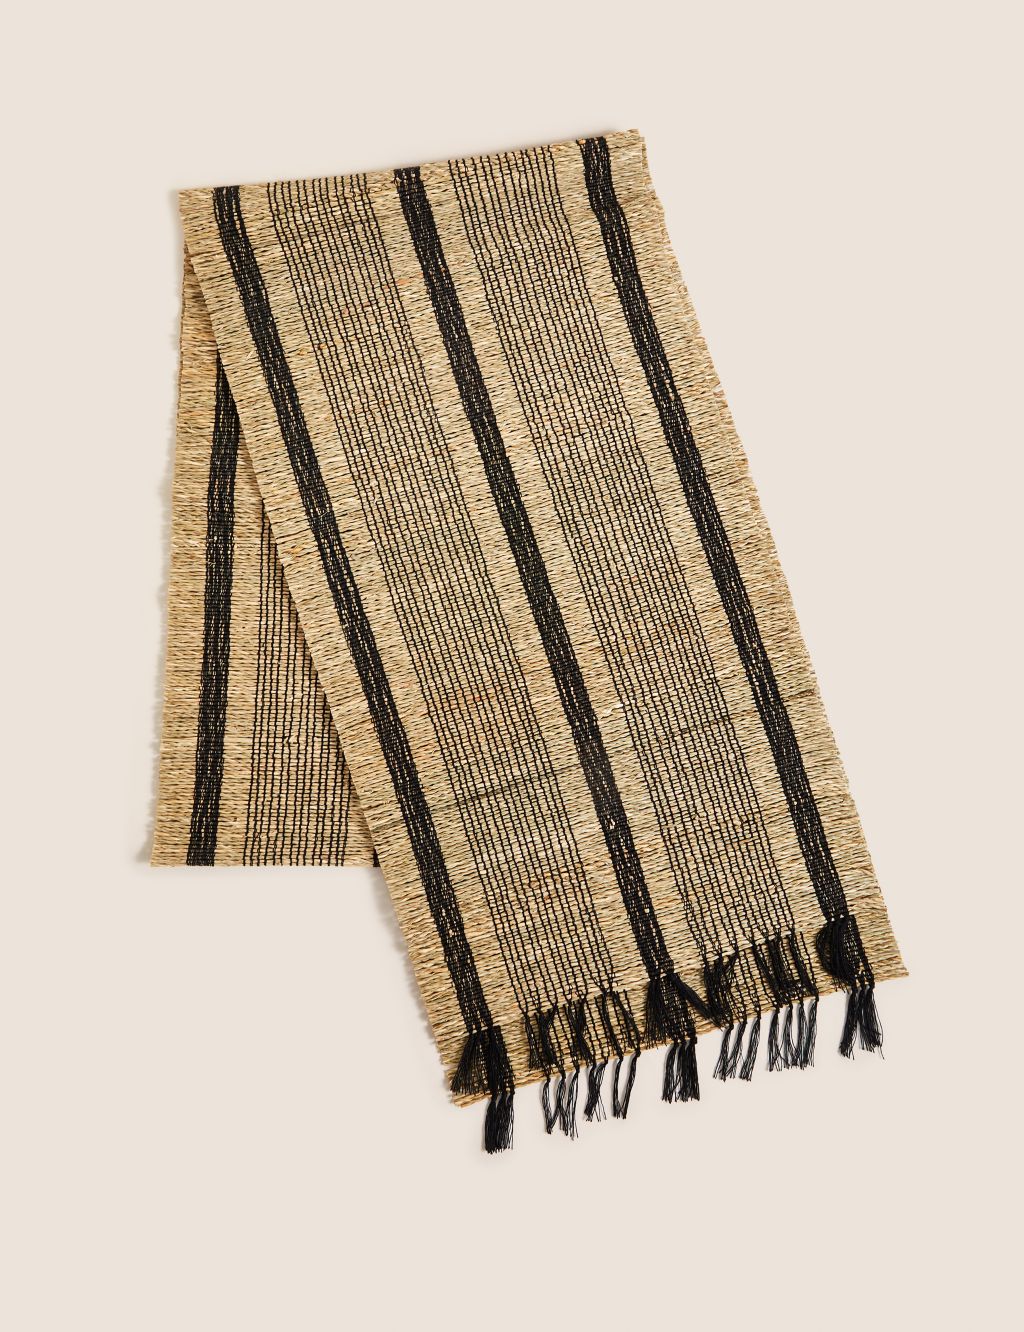 Striped Seagrass Table Runner